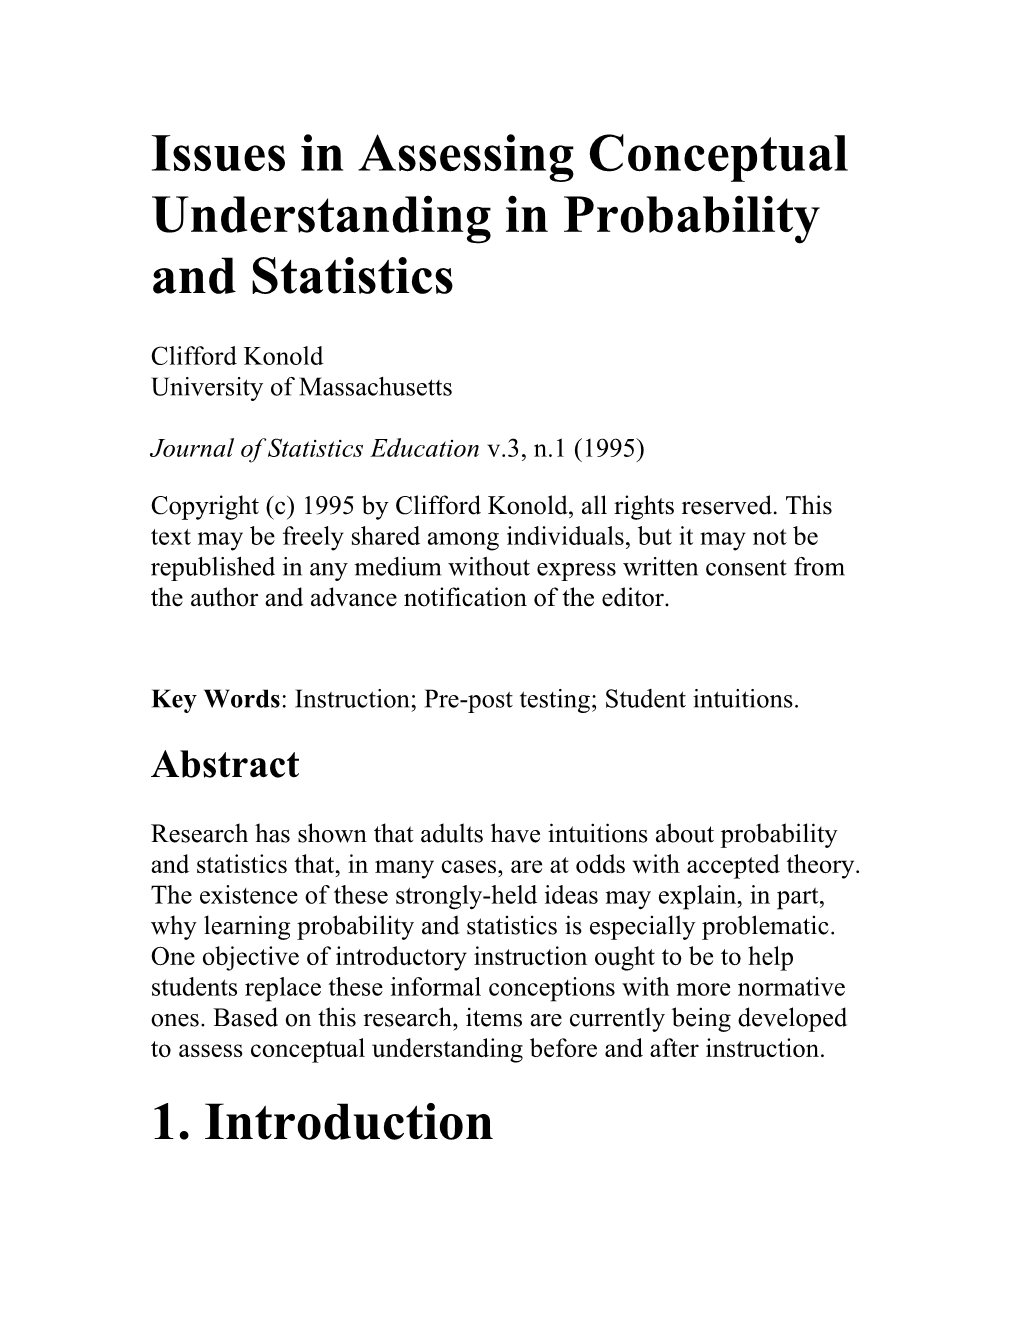 Issues in Assessing Conceptual Understanding in Probability and Statistics